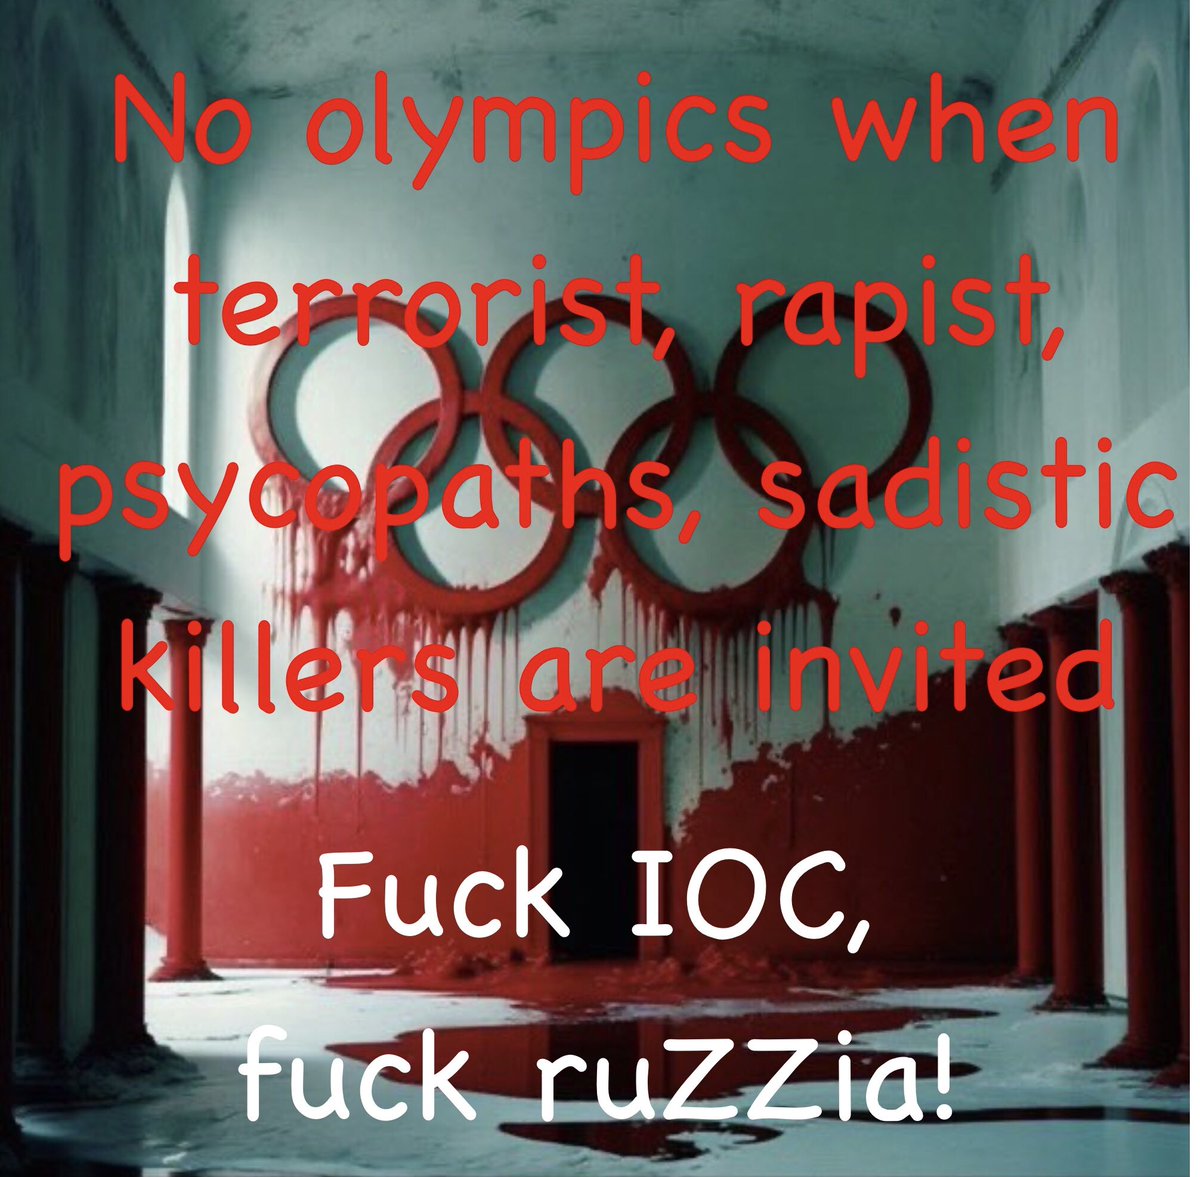 I will boycott olympics in Paris 2020. I will boycott all betting sites that have bet on the nazifederation and their vassalstate and of course all products that sponsor the olympics 🤬🤬🤬